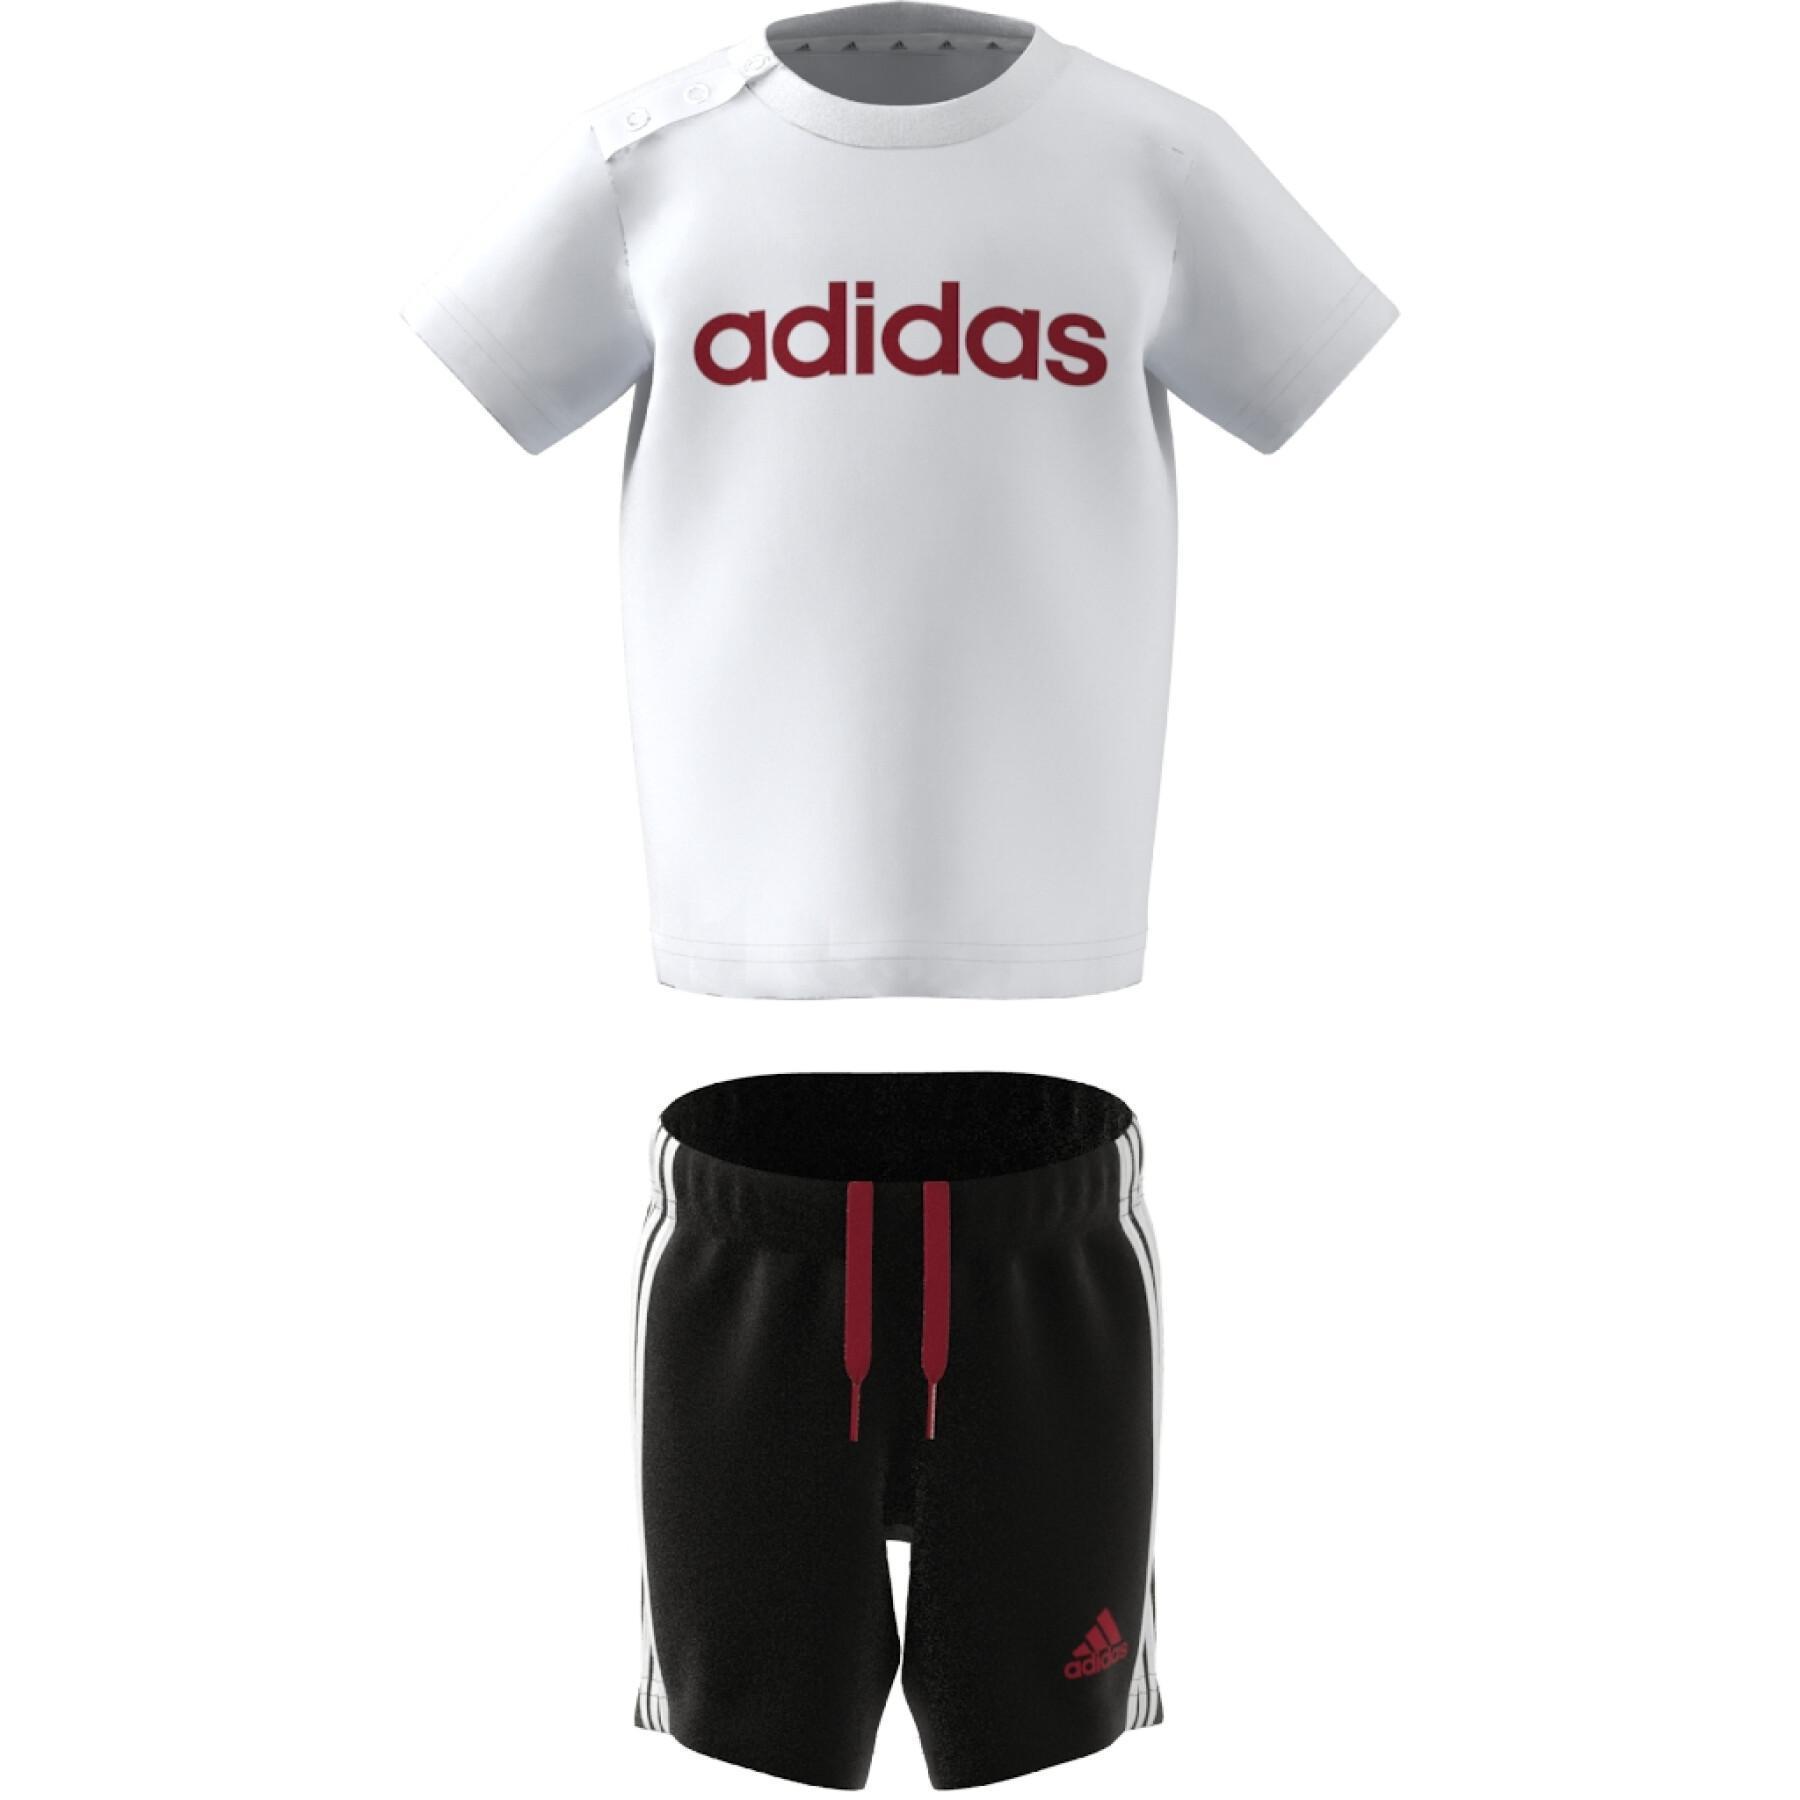 Organic cotton t-shirt and shorts set adidas 3-Stripes Essentials Lineage -  adidas - Brands - Lifestyle | Sport-T-Shirts